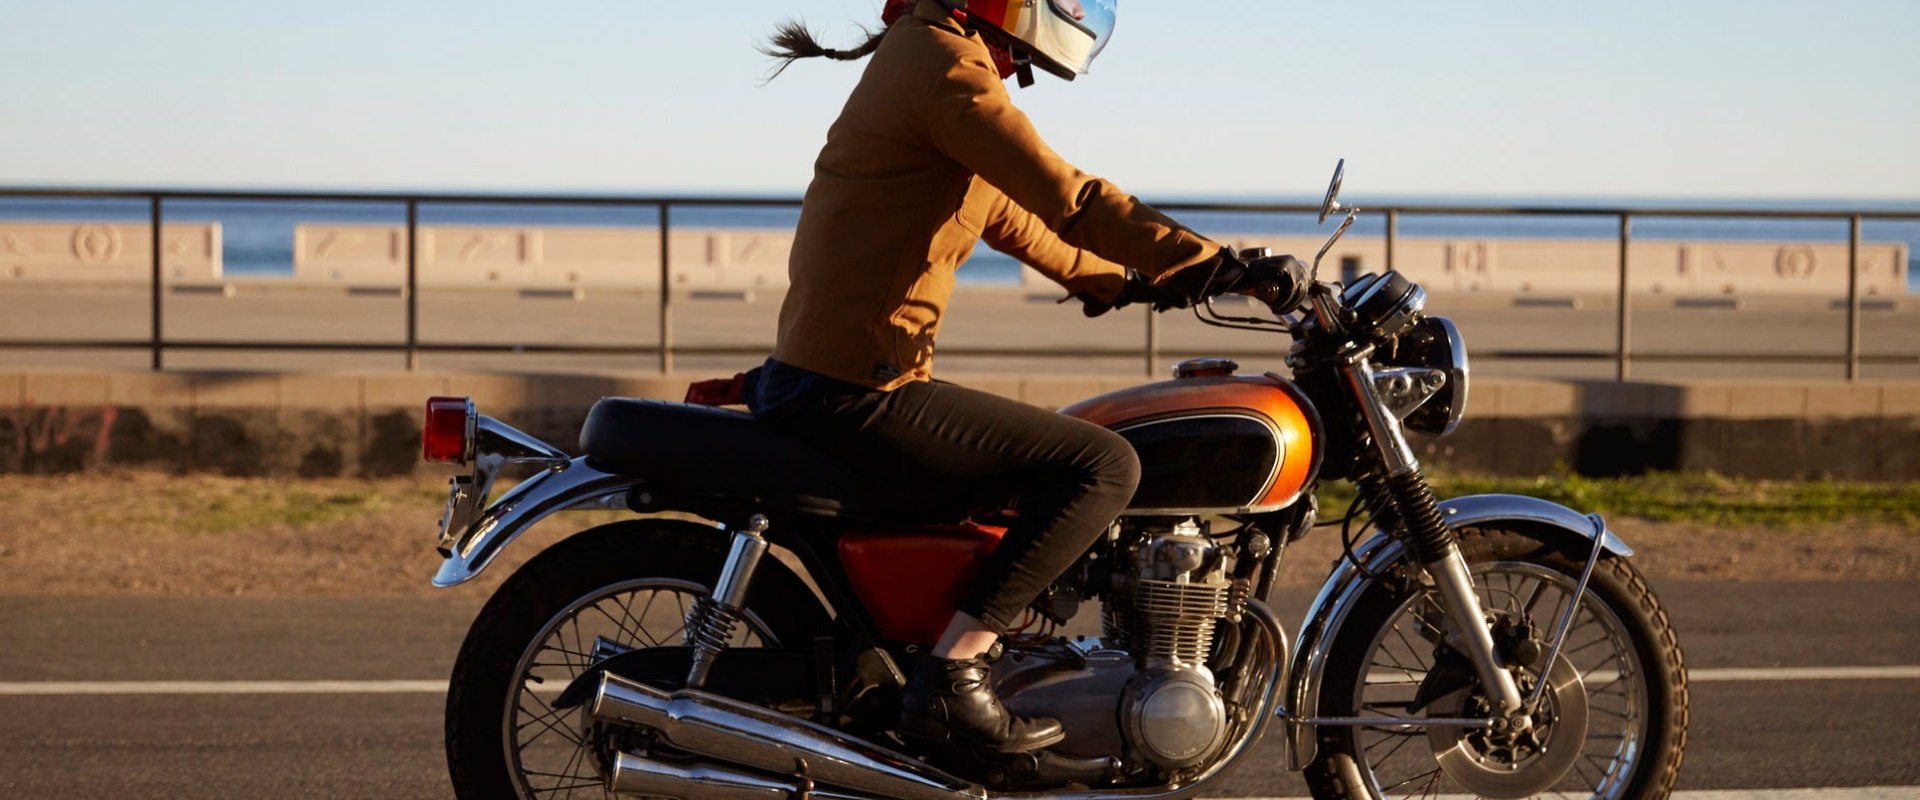 What Is The Minimum Motorcycle Insurance Cost In Texas?